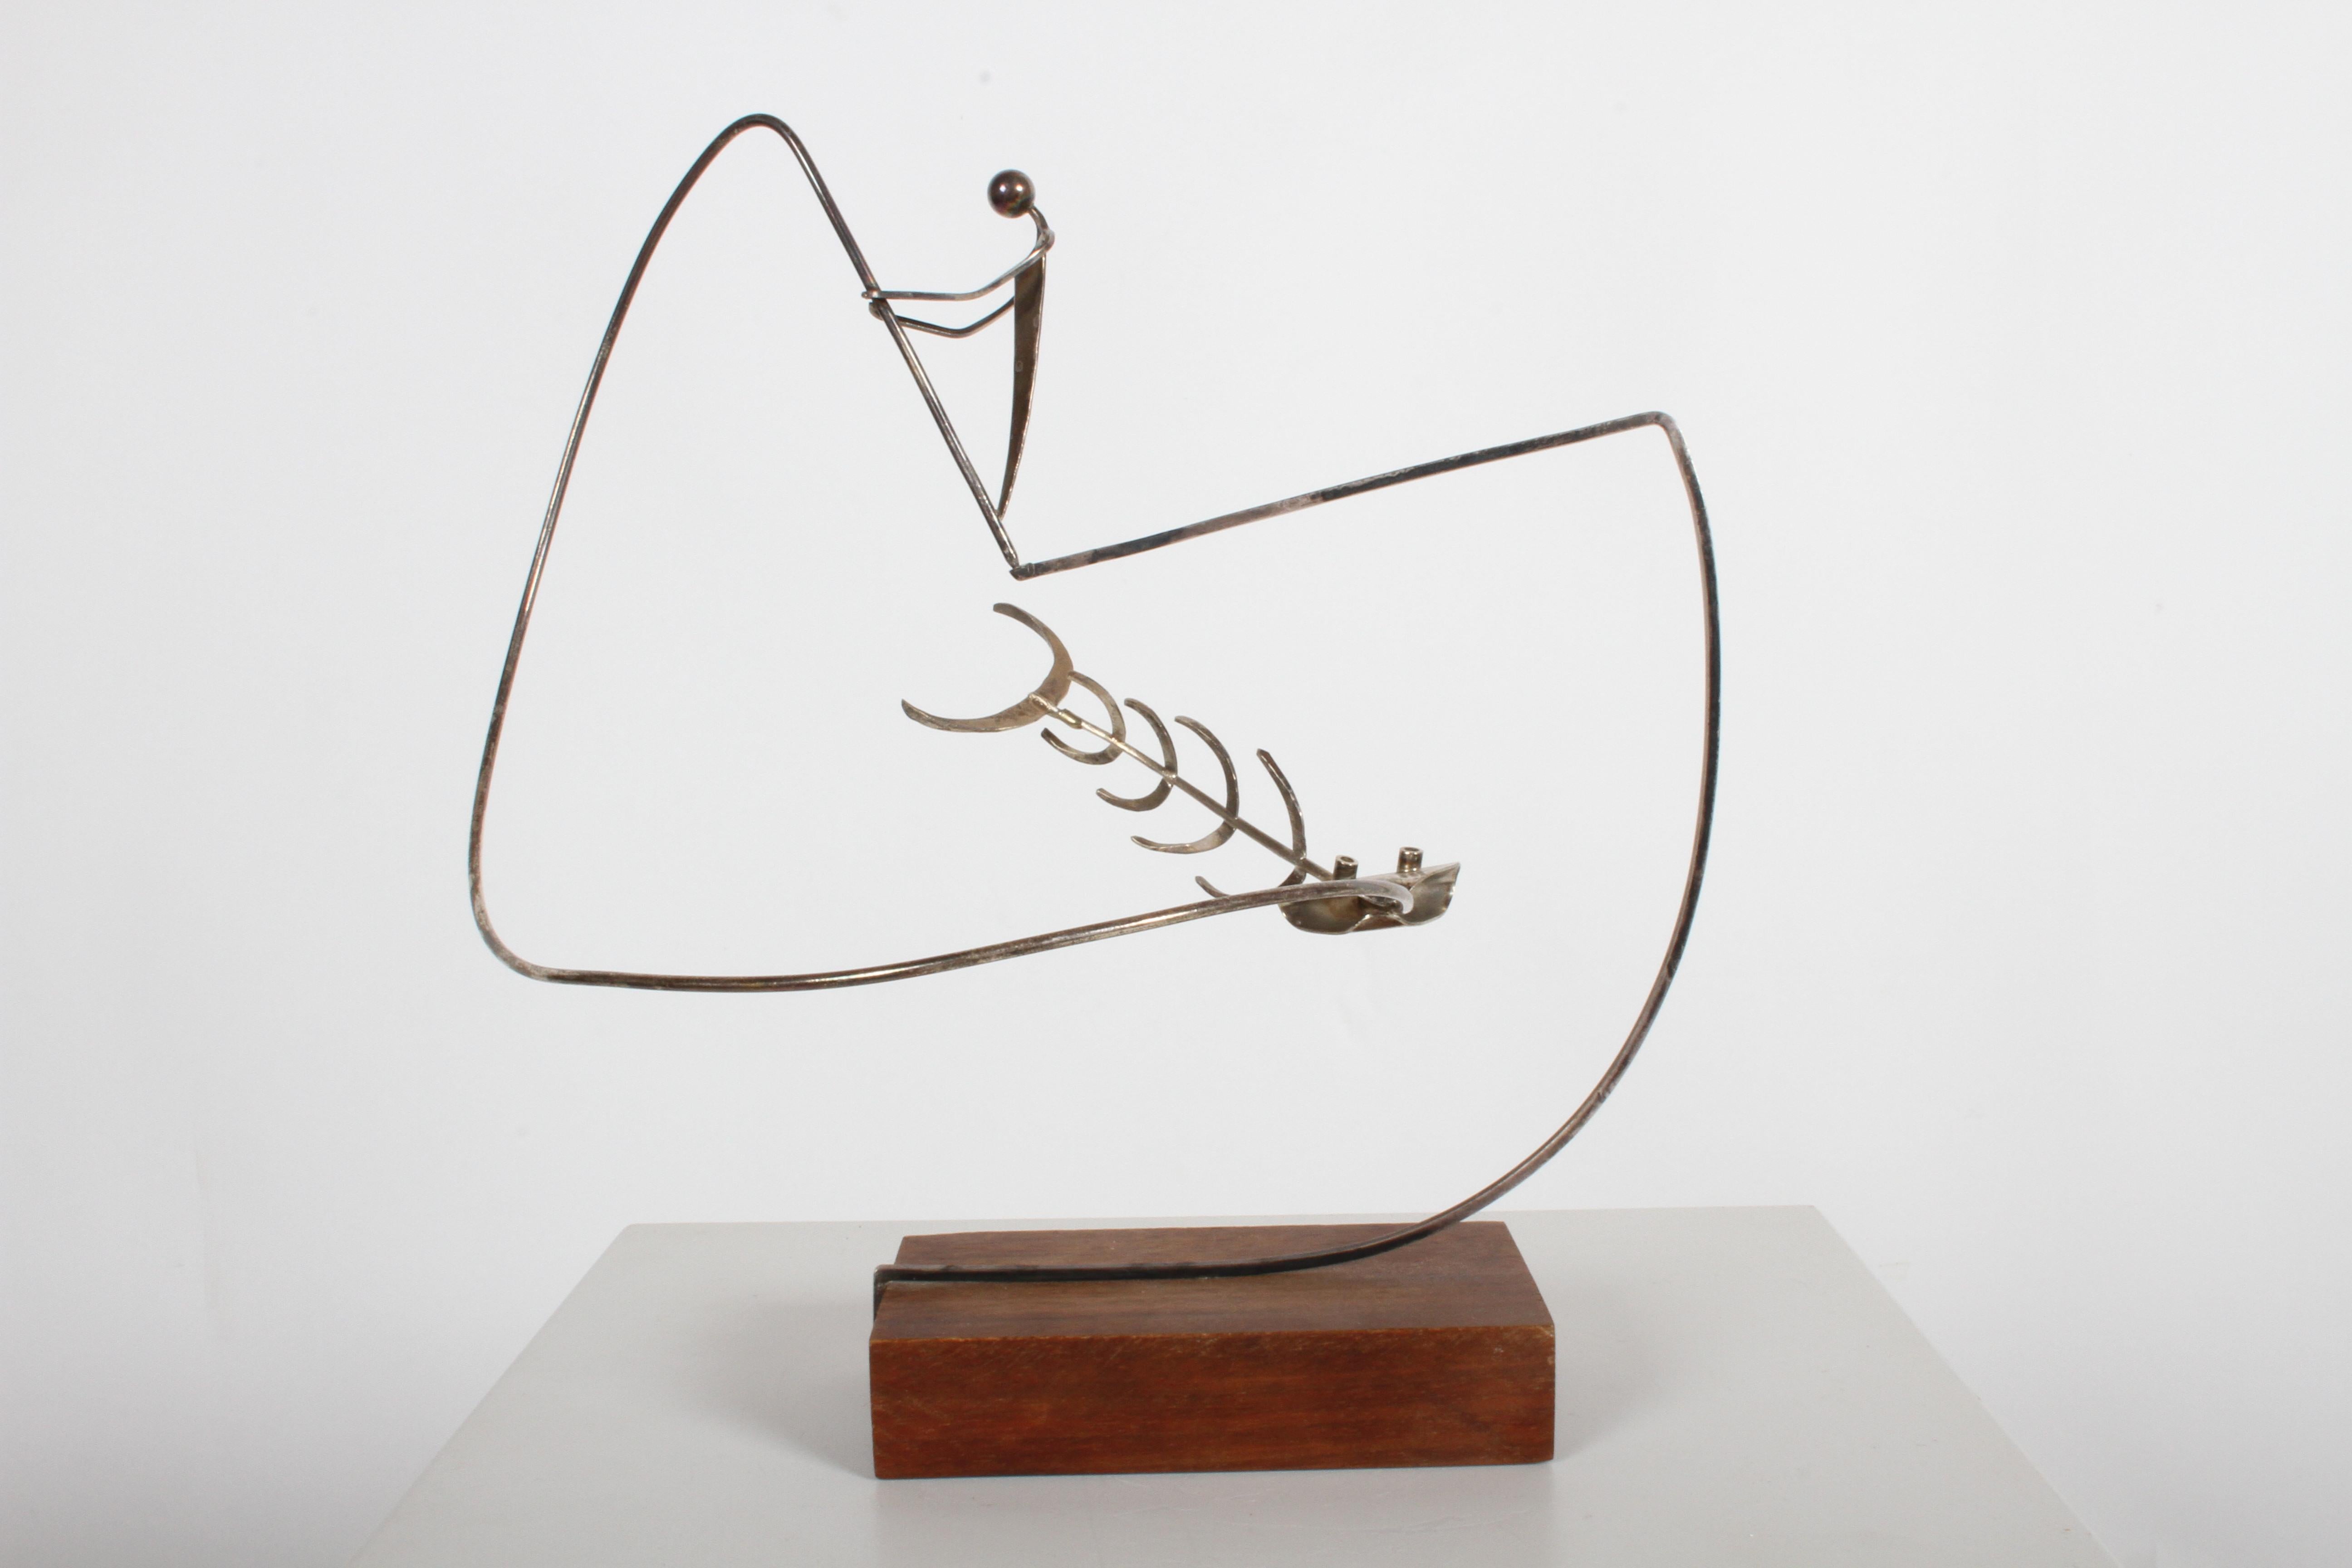 Paul A. Lobel (1899-1983) modernist silversmith, sculptor and artist. Lobel sold his jewelry and art at his Greenwich village shop in the 1940s and 1950s. This two-piece sterling Kinetic sculpture is of a fisherman catching a fish on a wood base.